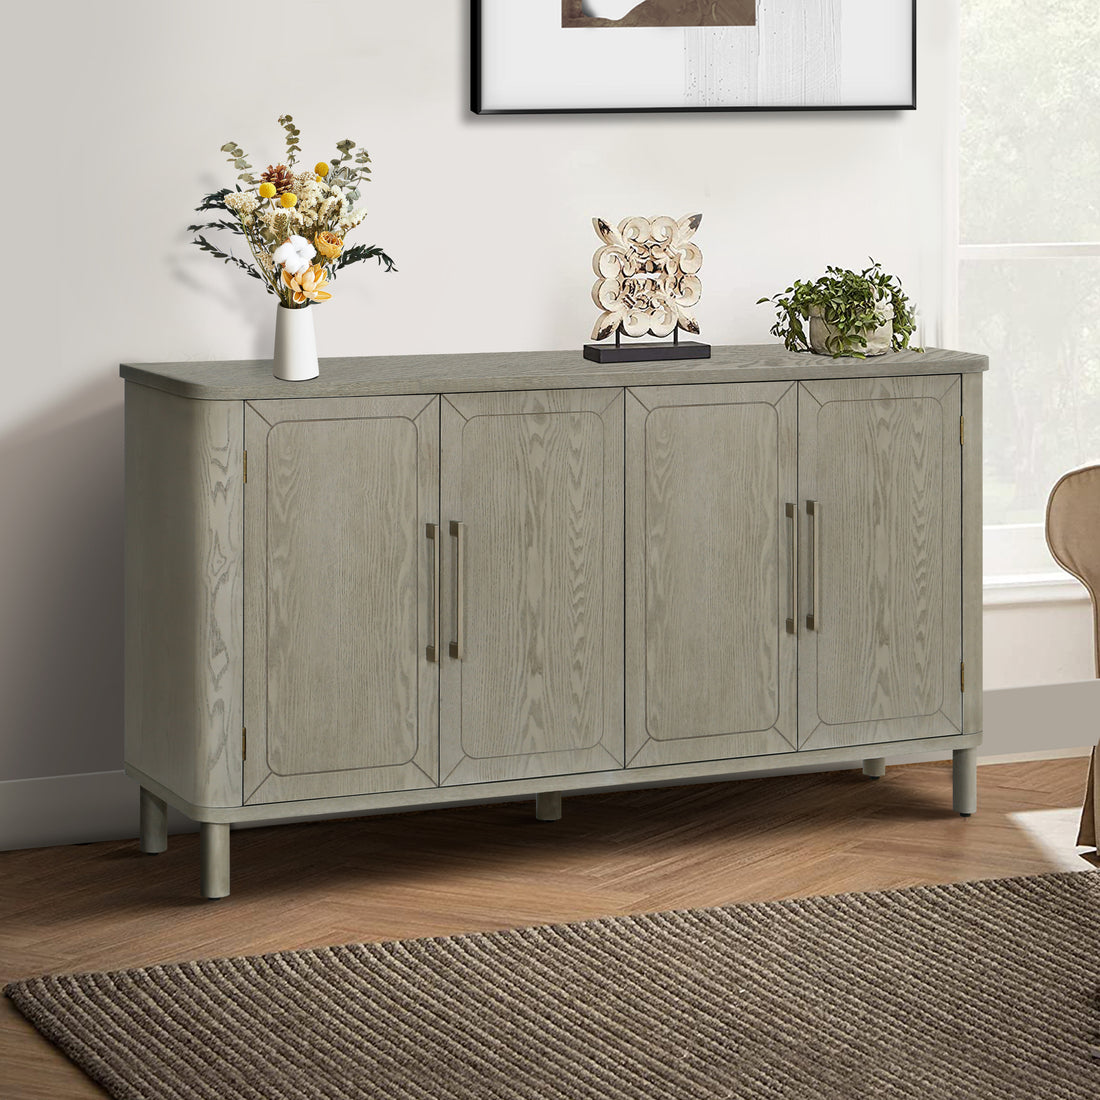 Four Door Storage Cabinet With Curved Countertop GRAT antique gray-mdf